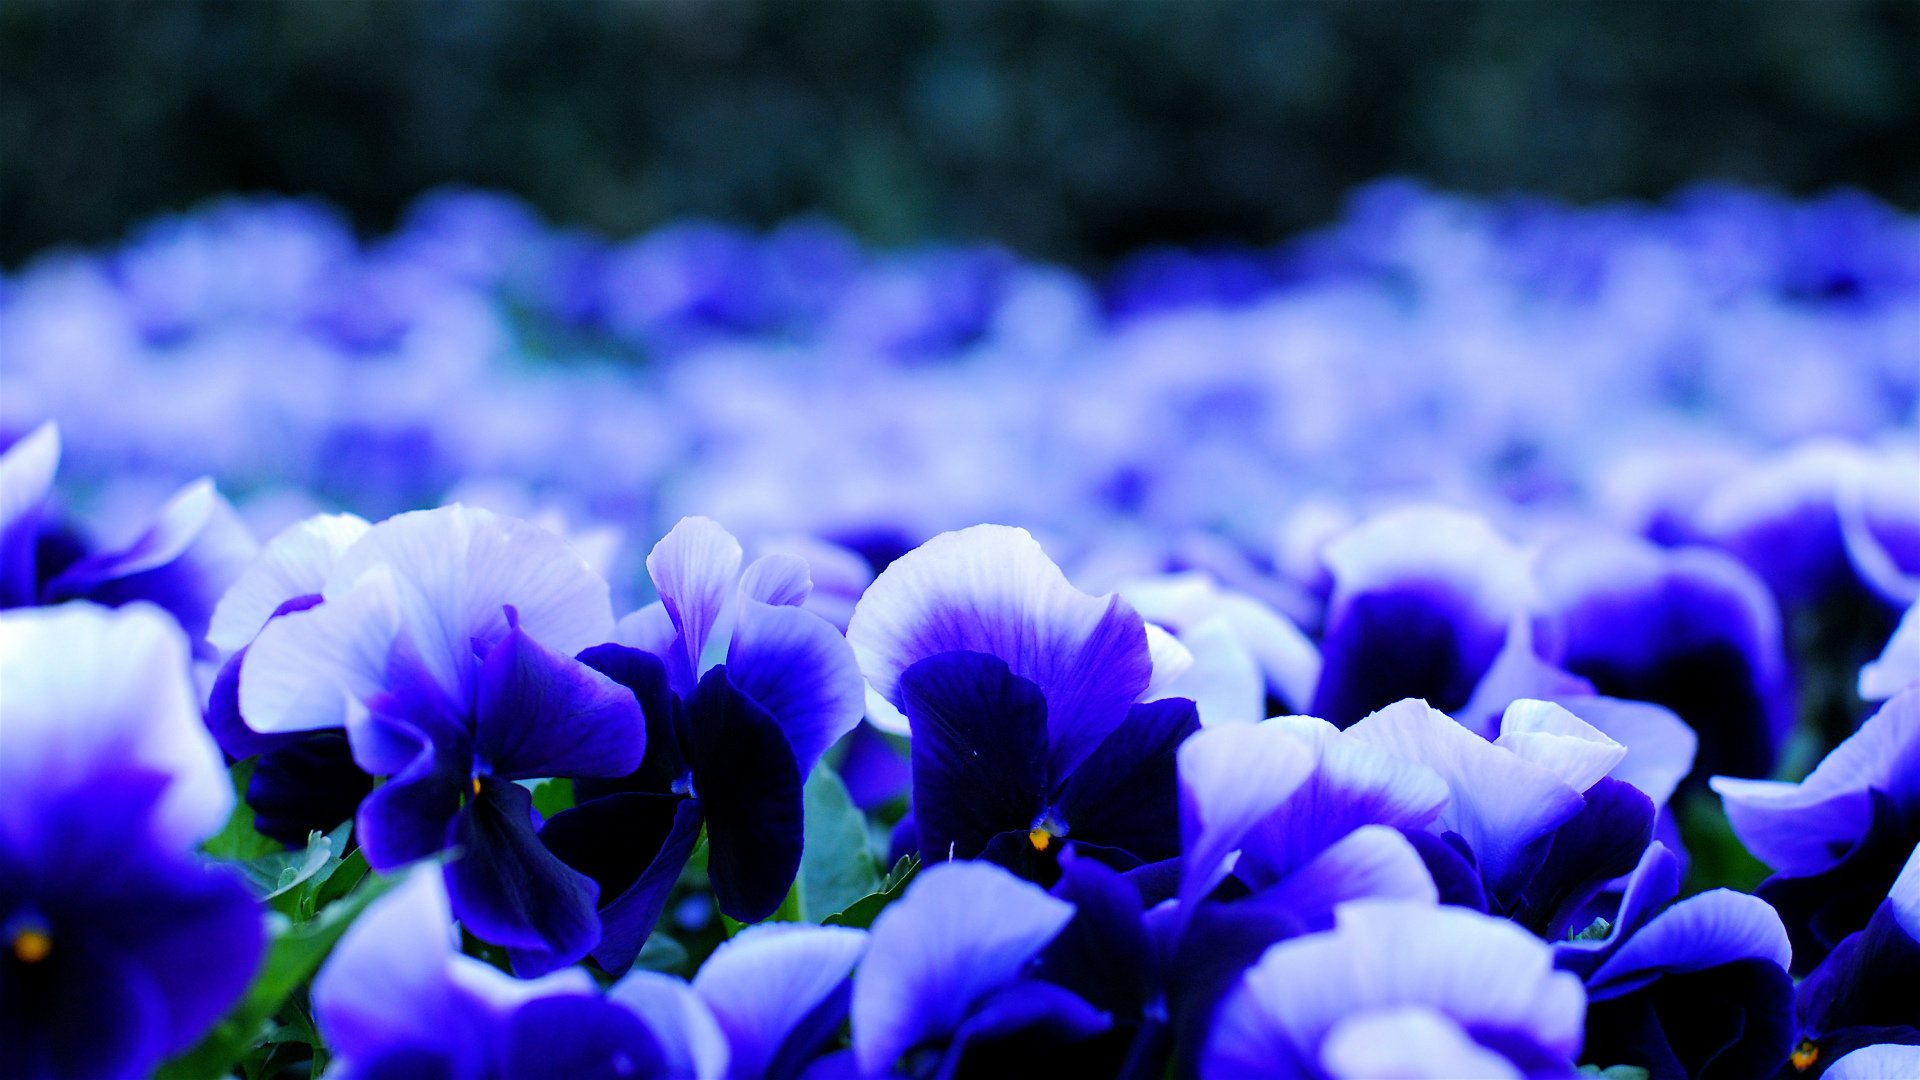 pansy, Viola, Blue, And, White, Petals, Flowers, Blur, Nature, Flowers, Beautiful Wallpaper